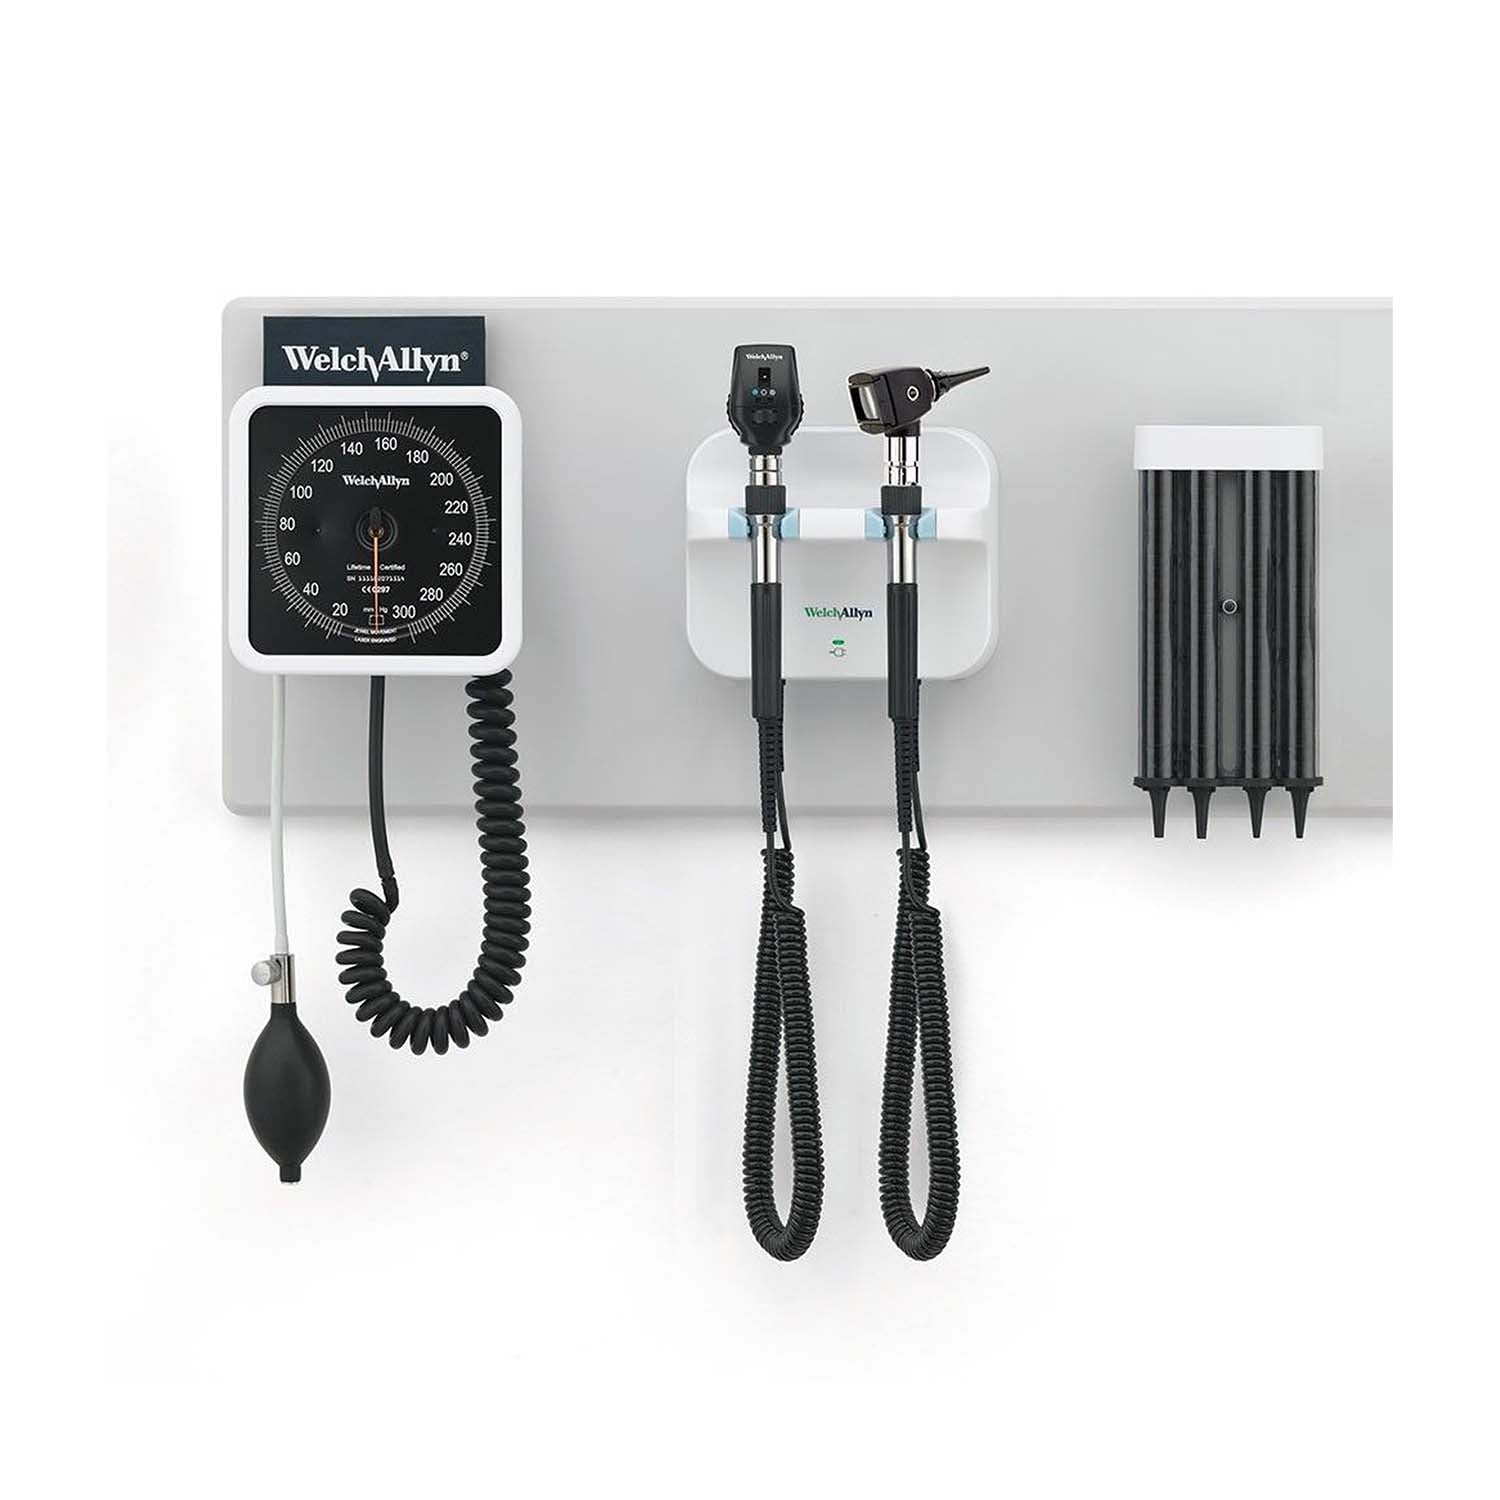 Welch Allyn GS777 Integrated Diagnostic System